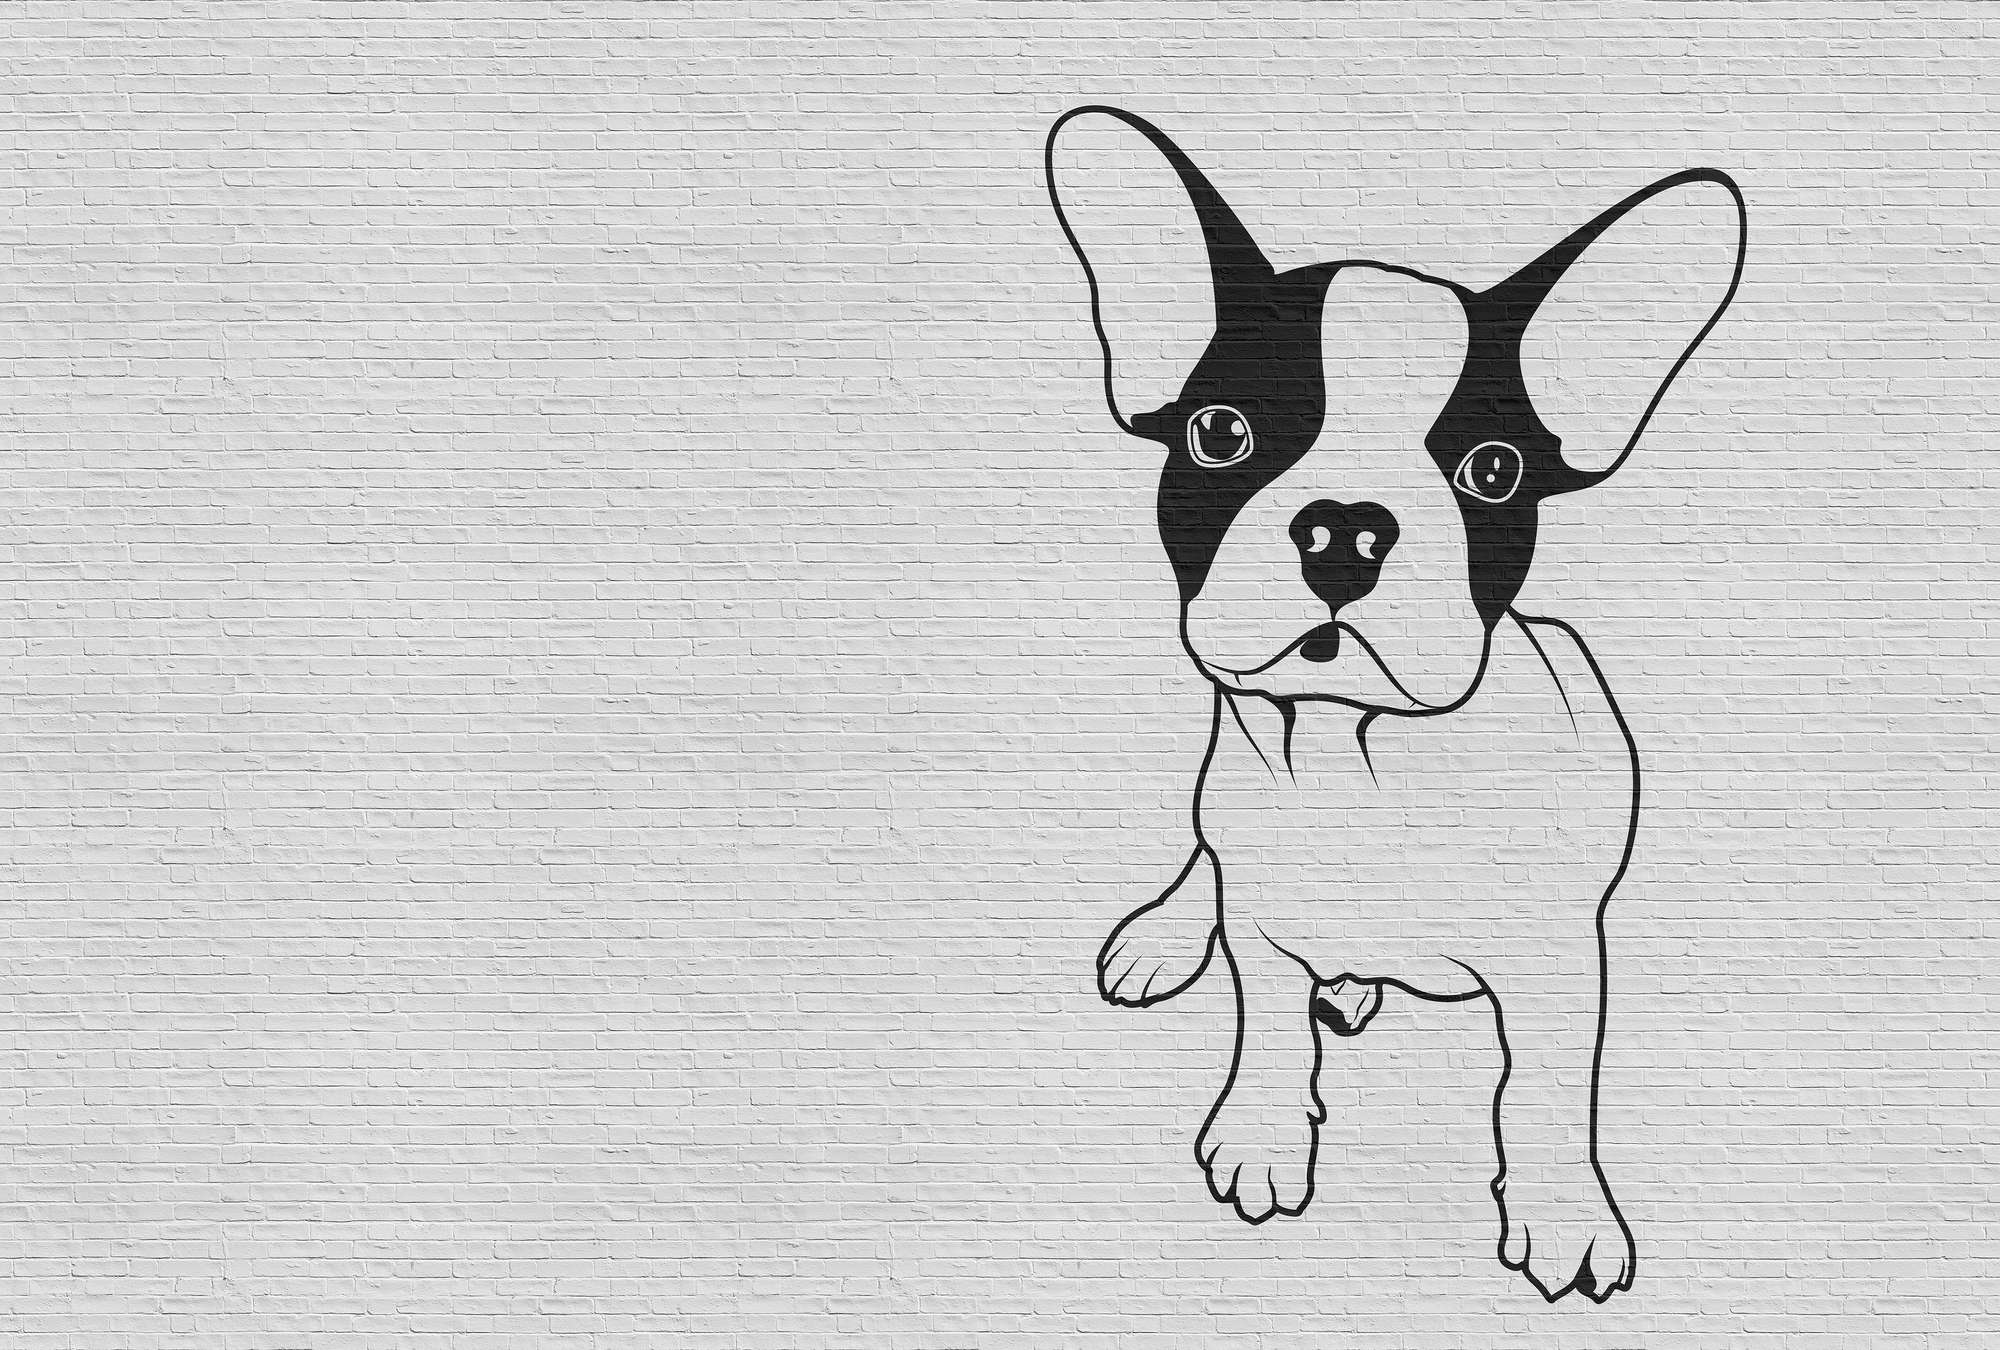             Tattoo you 2 - French Bulldog Wallpaper, Black and White - Grey, Black | Structure Non-woven
        